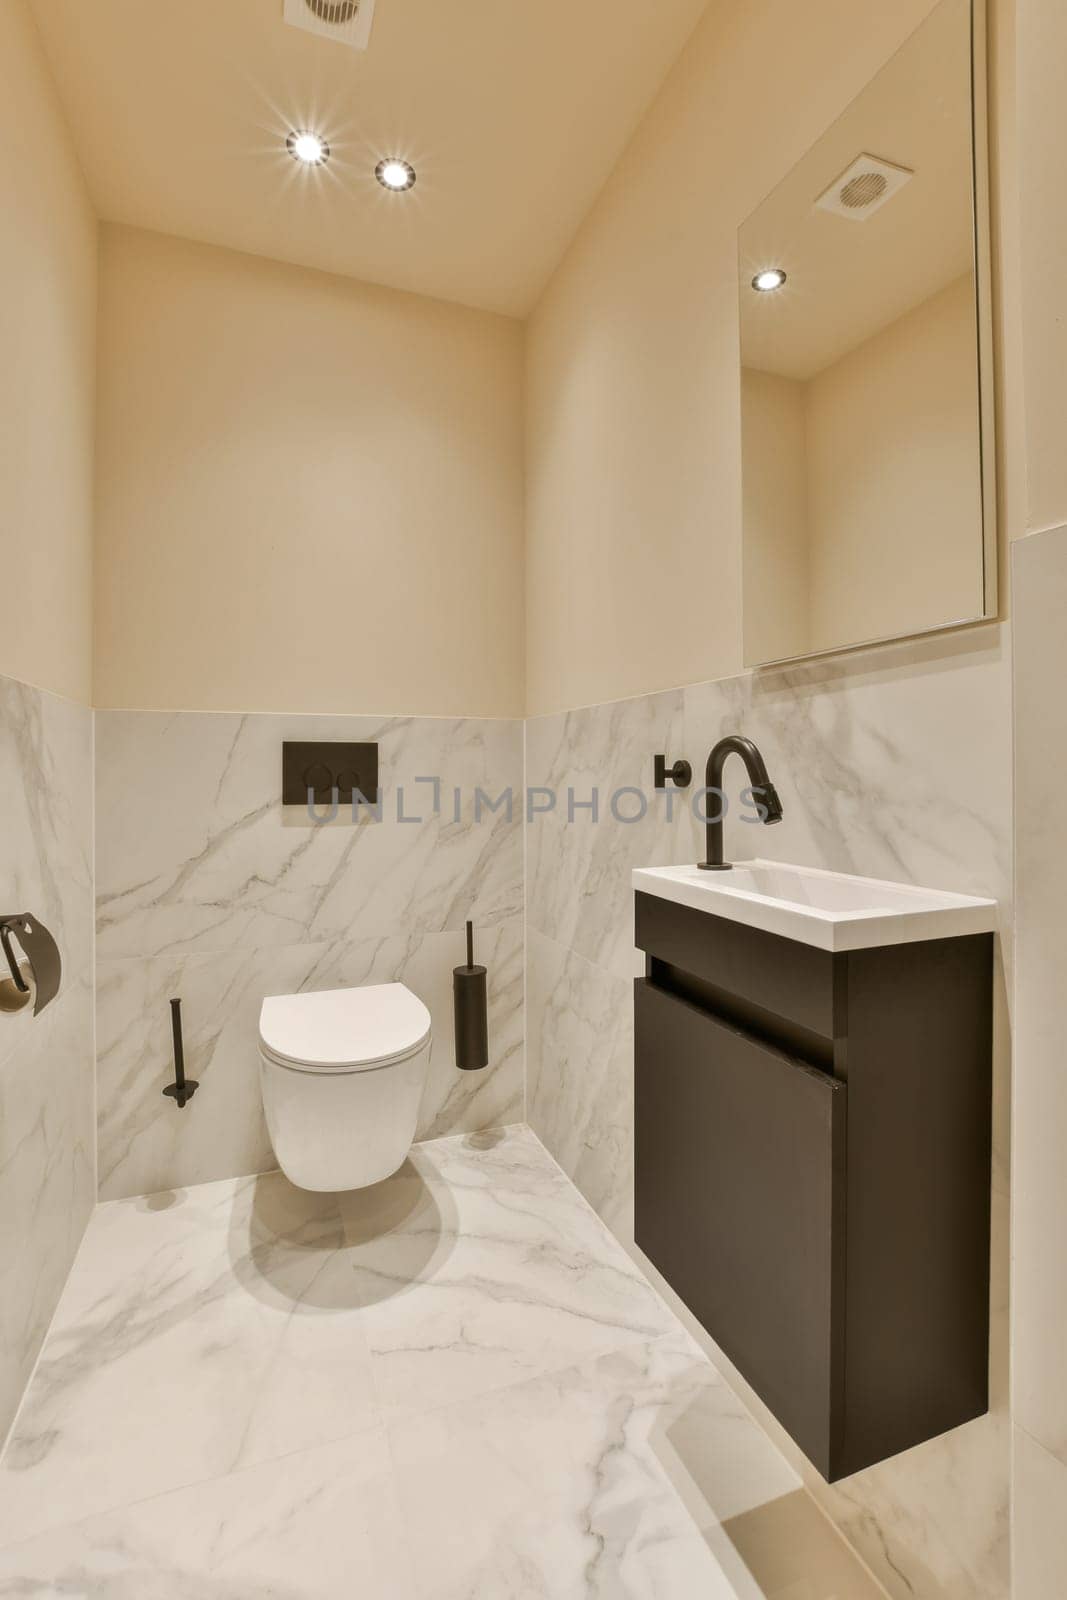 a modern bathroom with marble flooring and white walls, along with a black vanity in the room is illuminated by recessed lights